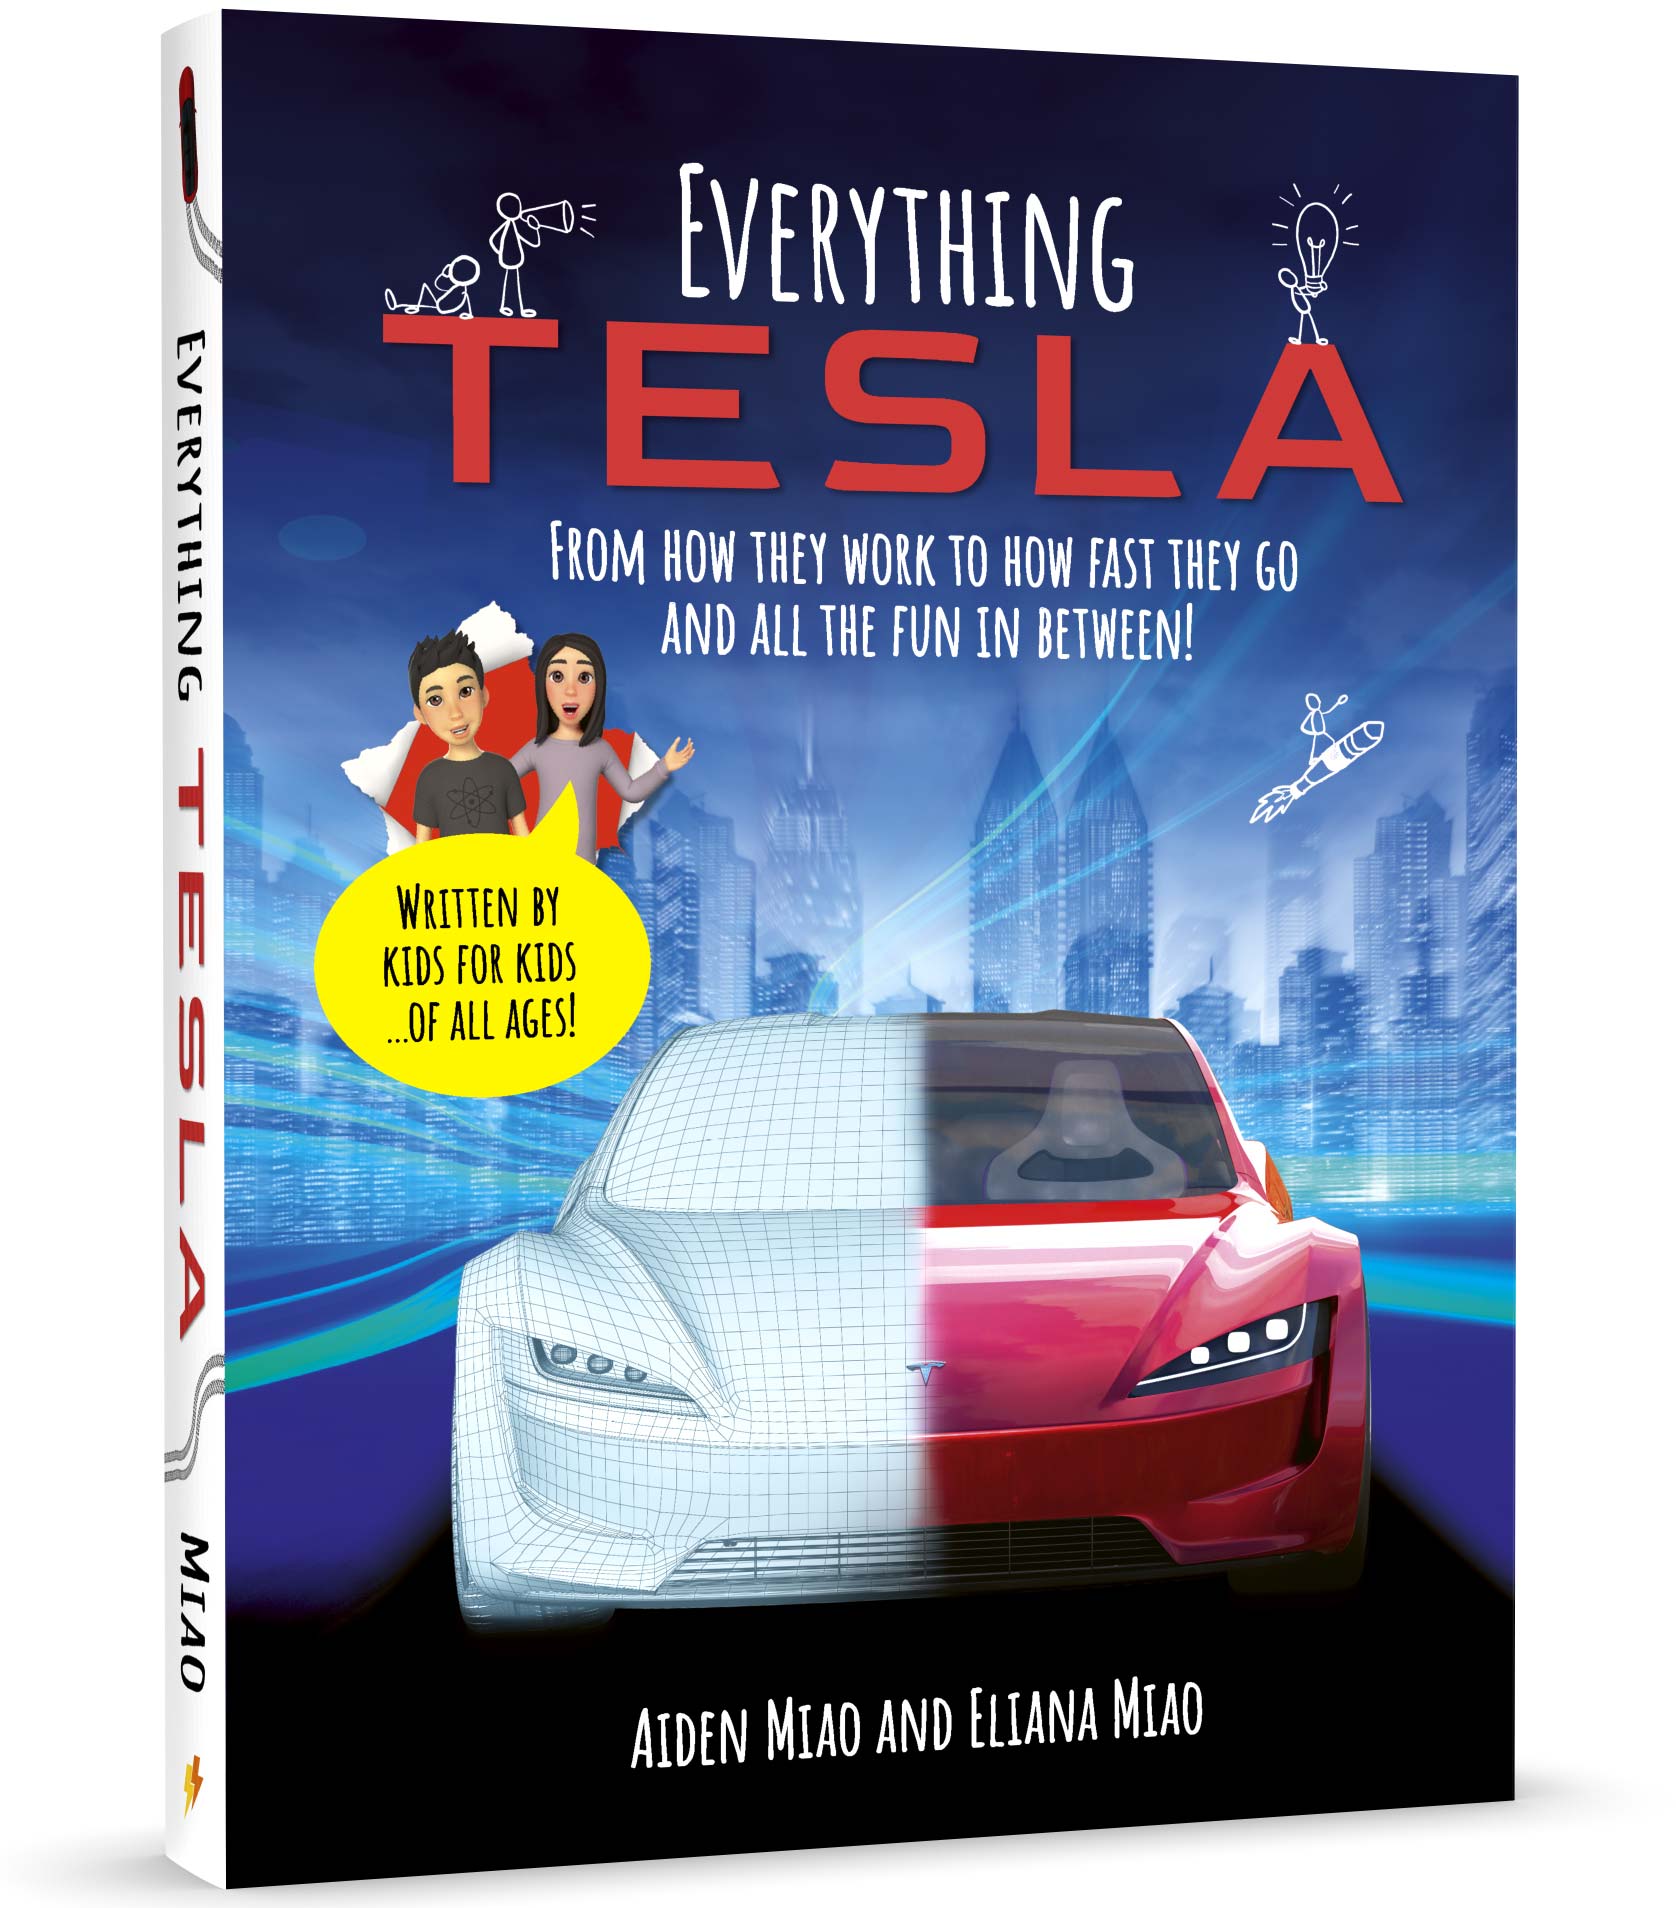 Young Tesla enthusiasts write 200-page kids’ book on the automaker